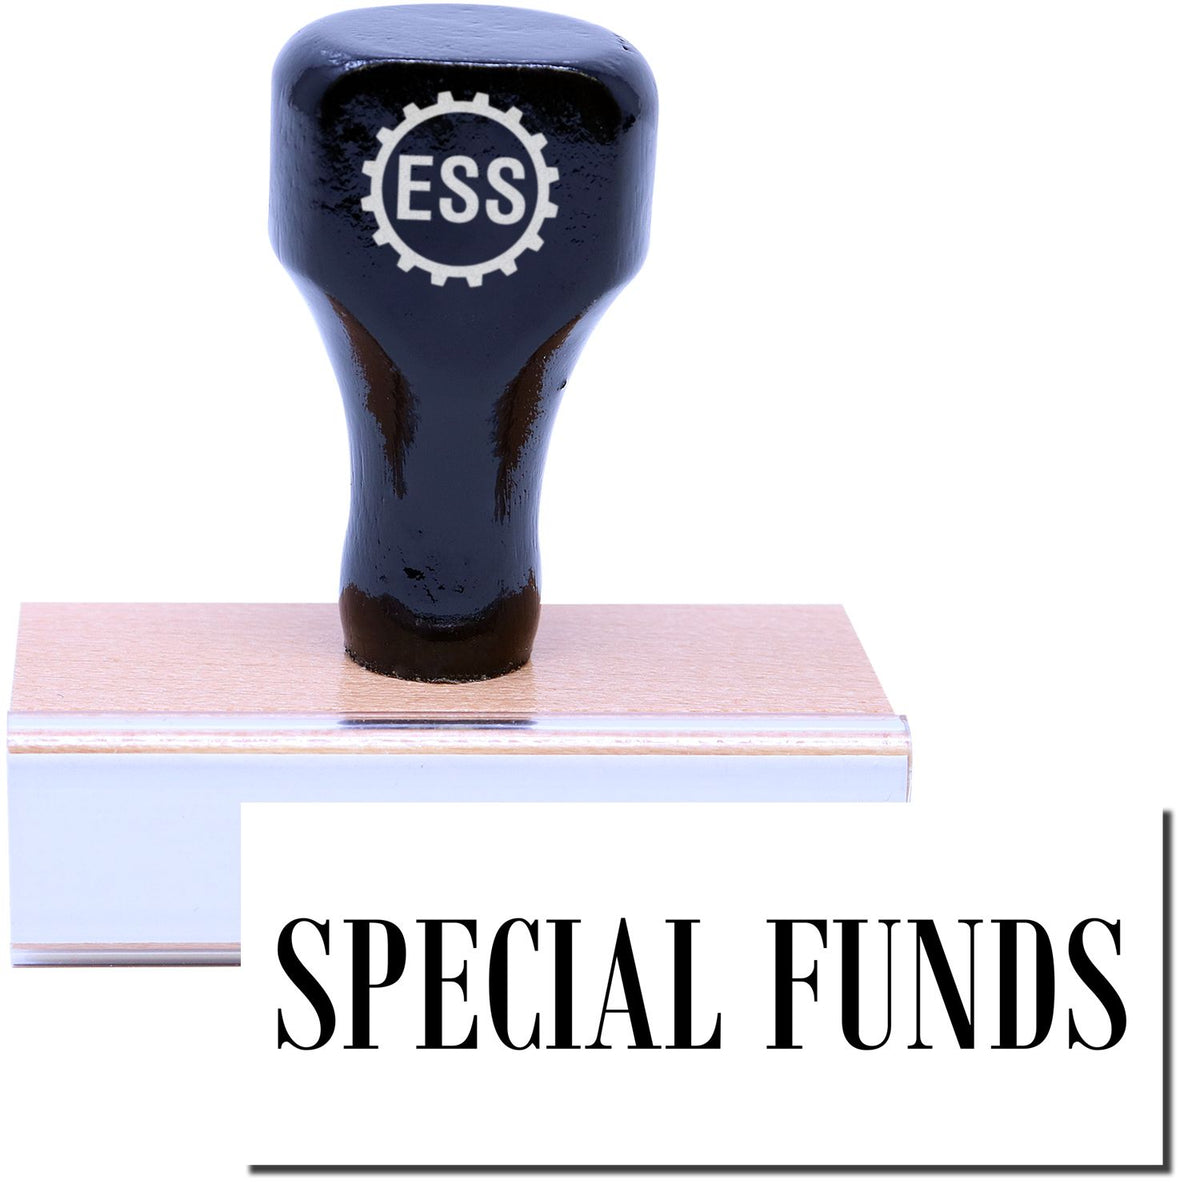 A stock office rubber stamp with a stamped image showing how the text &quot;SPECIAL FUNDS&quot; is displayed after stamping.